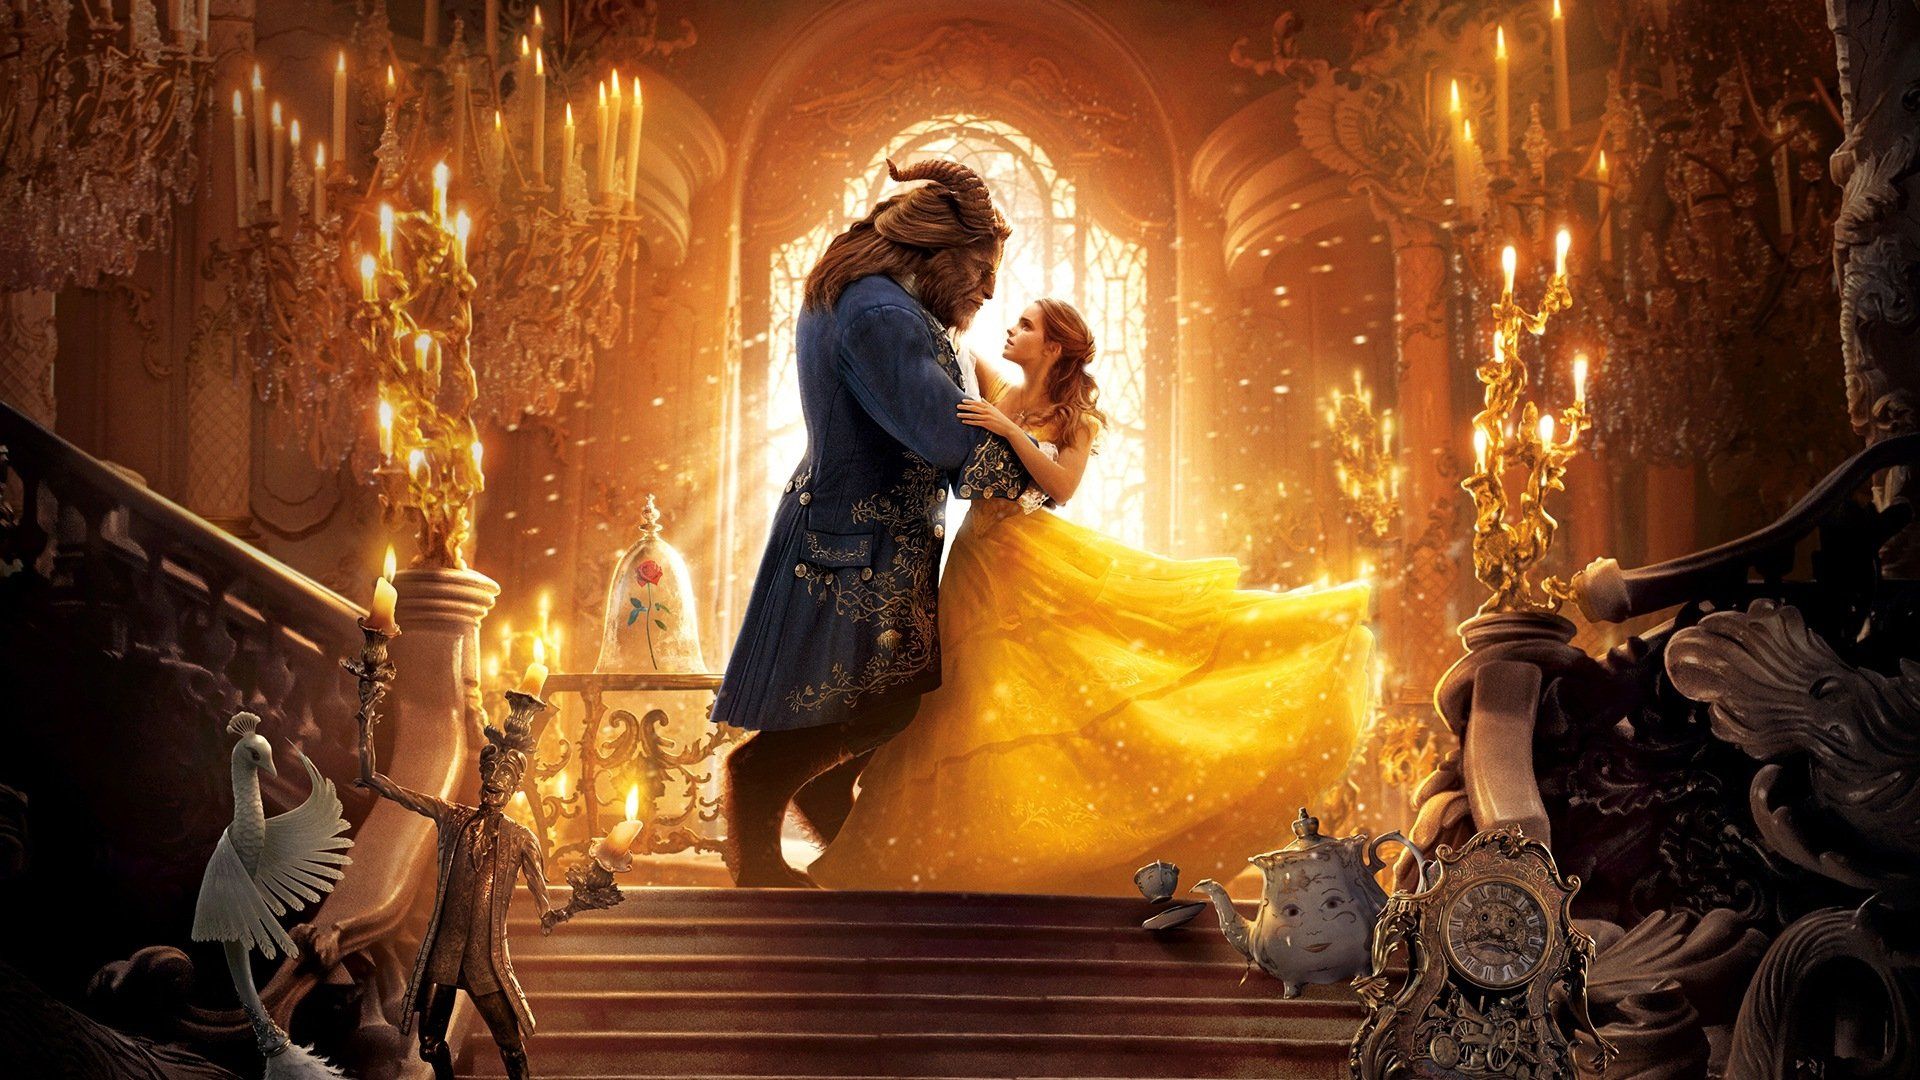 Beauty and the Beast Wallpaper Free Beauty and the Beast